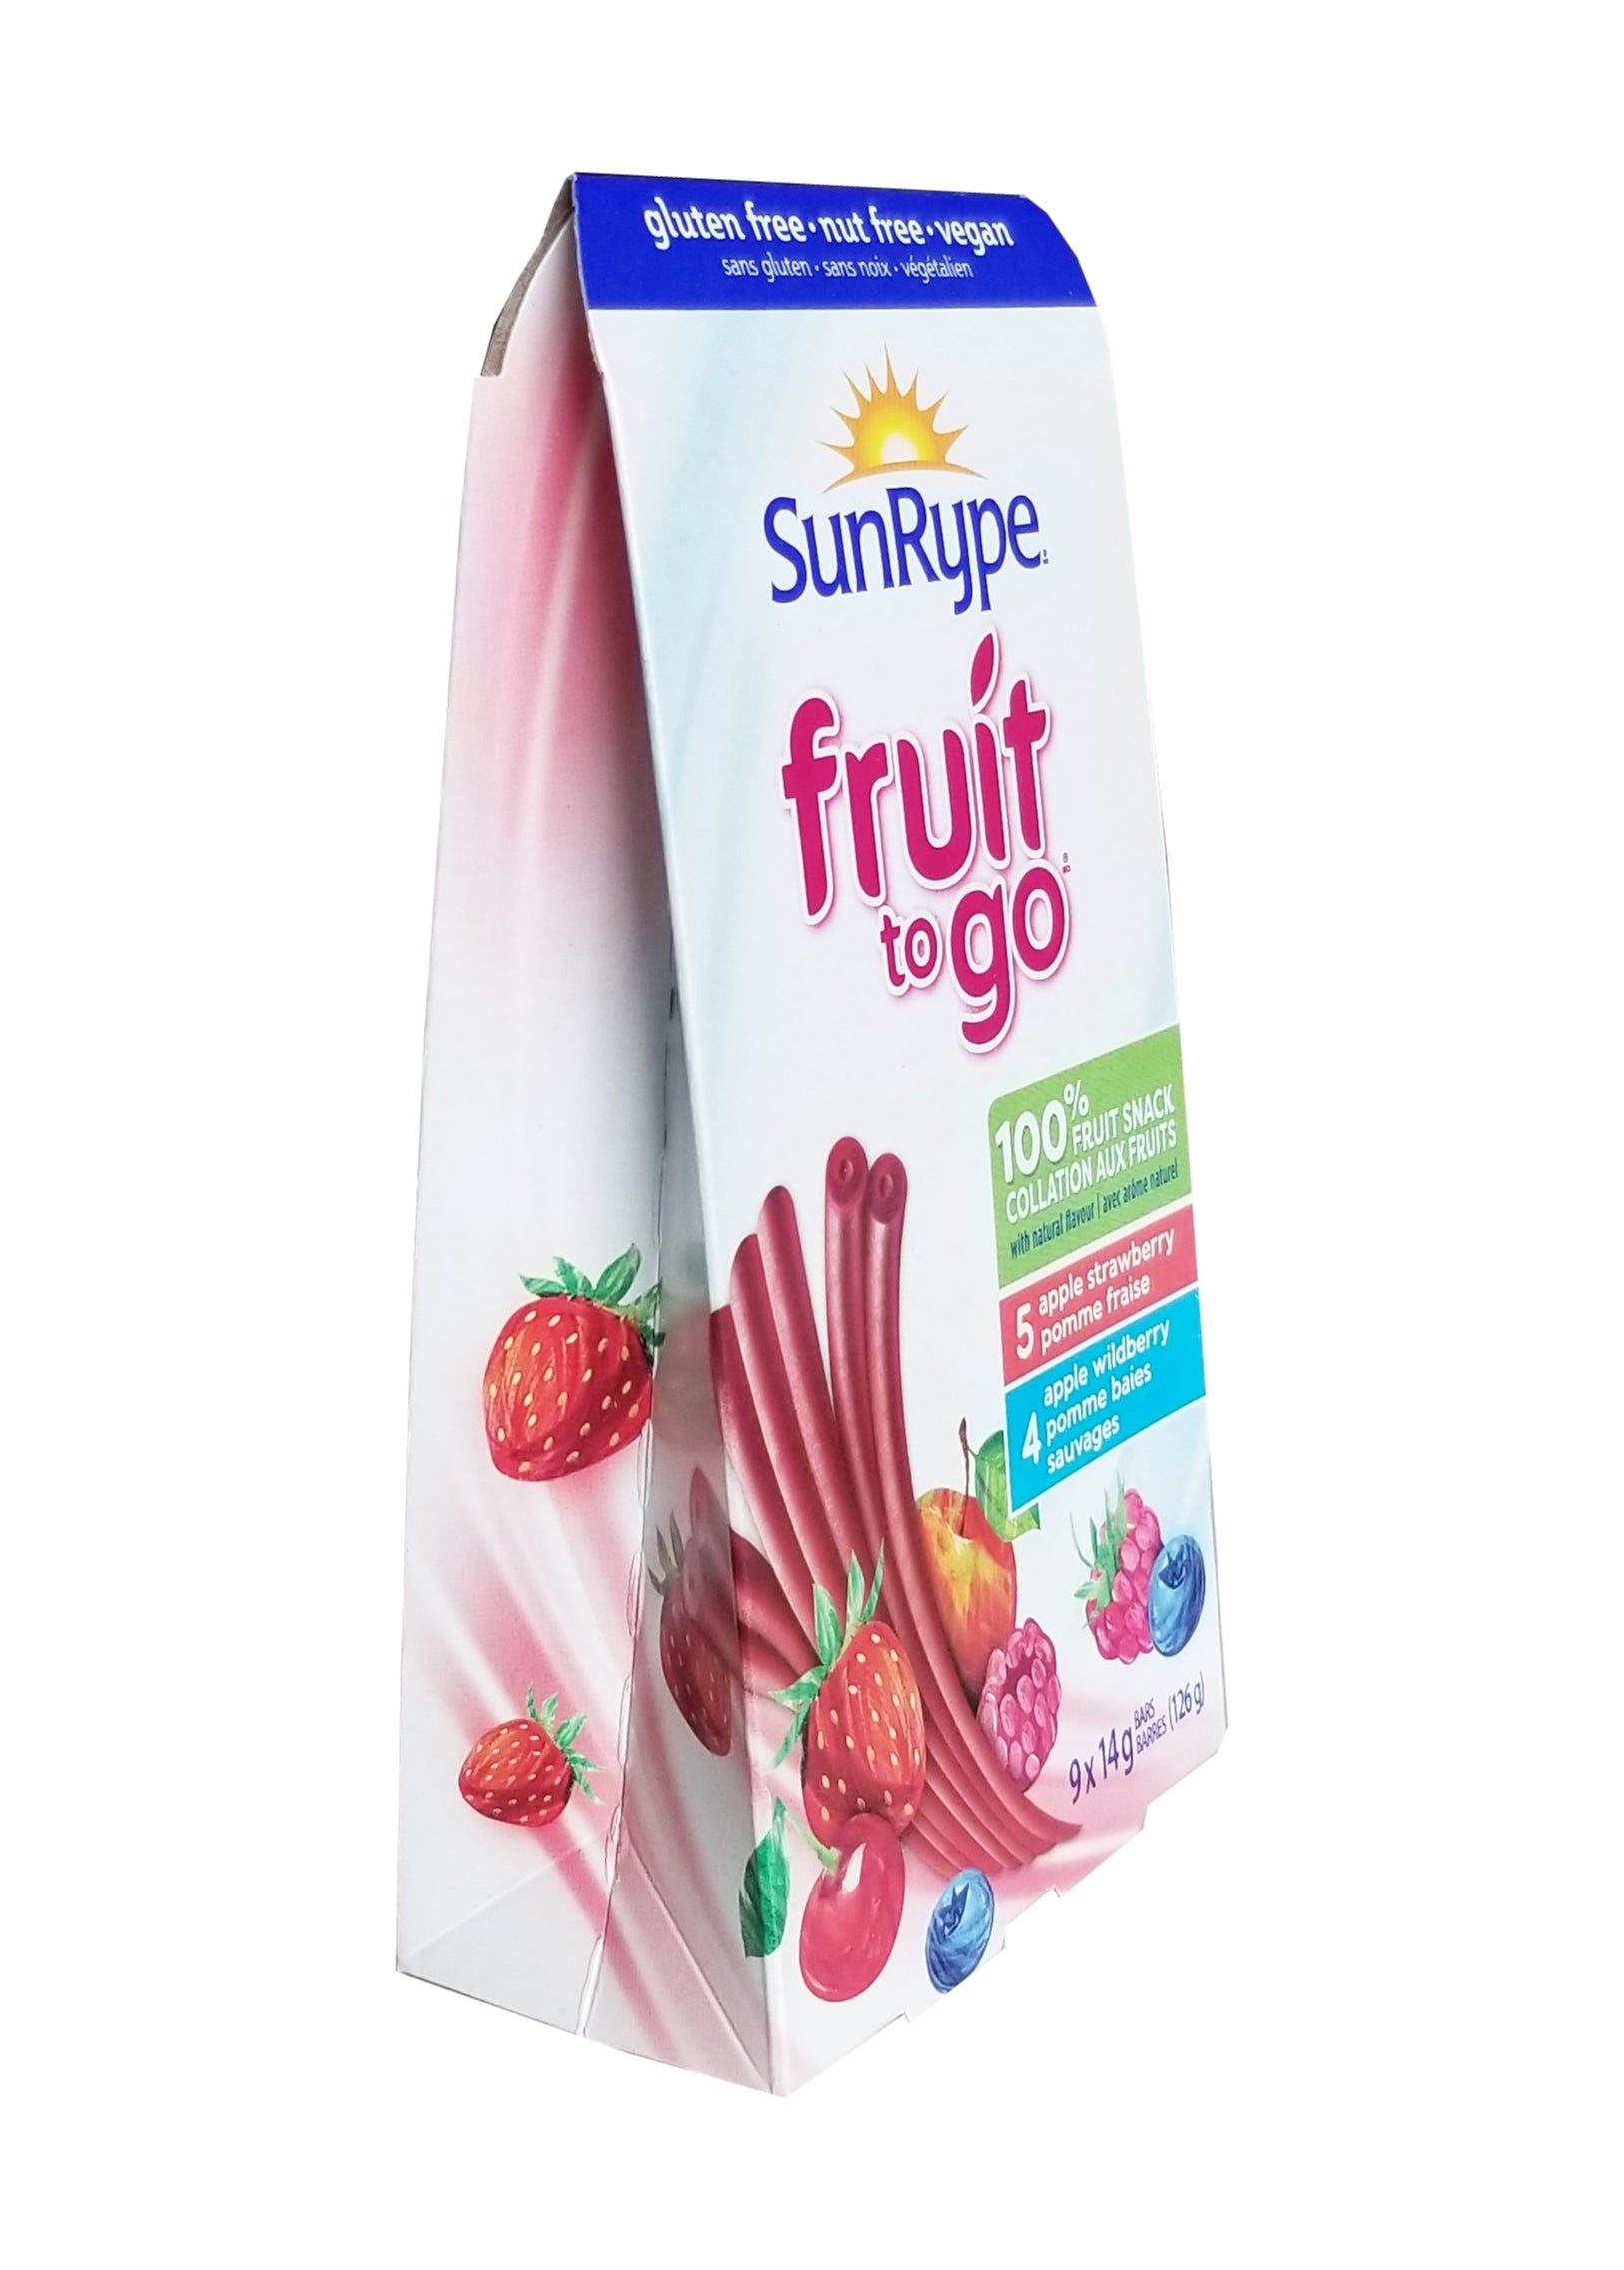 SunRype Fruit to Go Fruit Bars, Apple Strawberry & Apple Wildberry Flavors, 9x14g/0.5 oz. Bars {Imported from Canada}